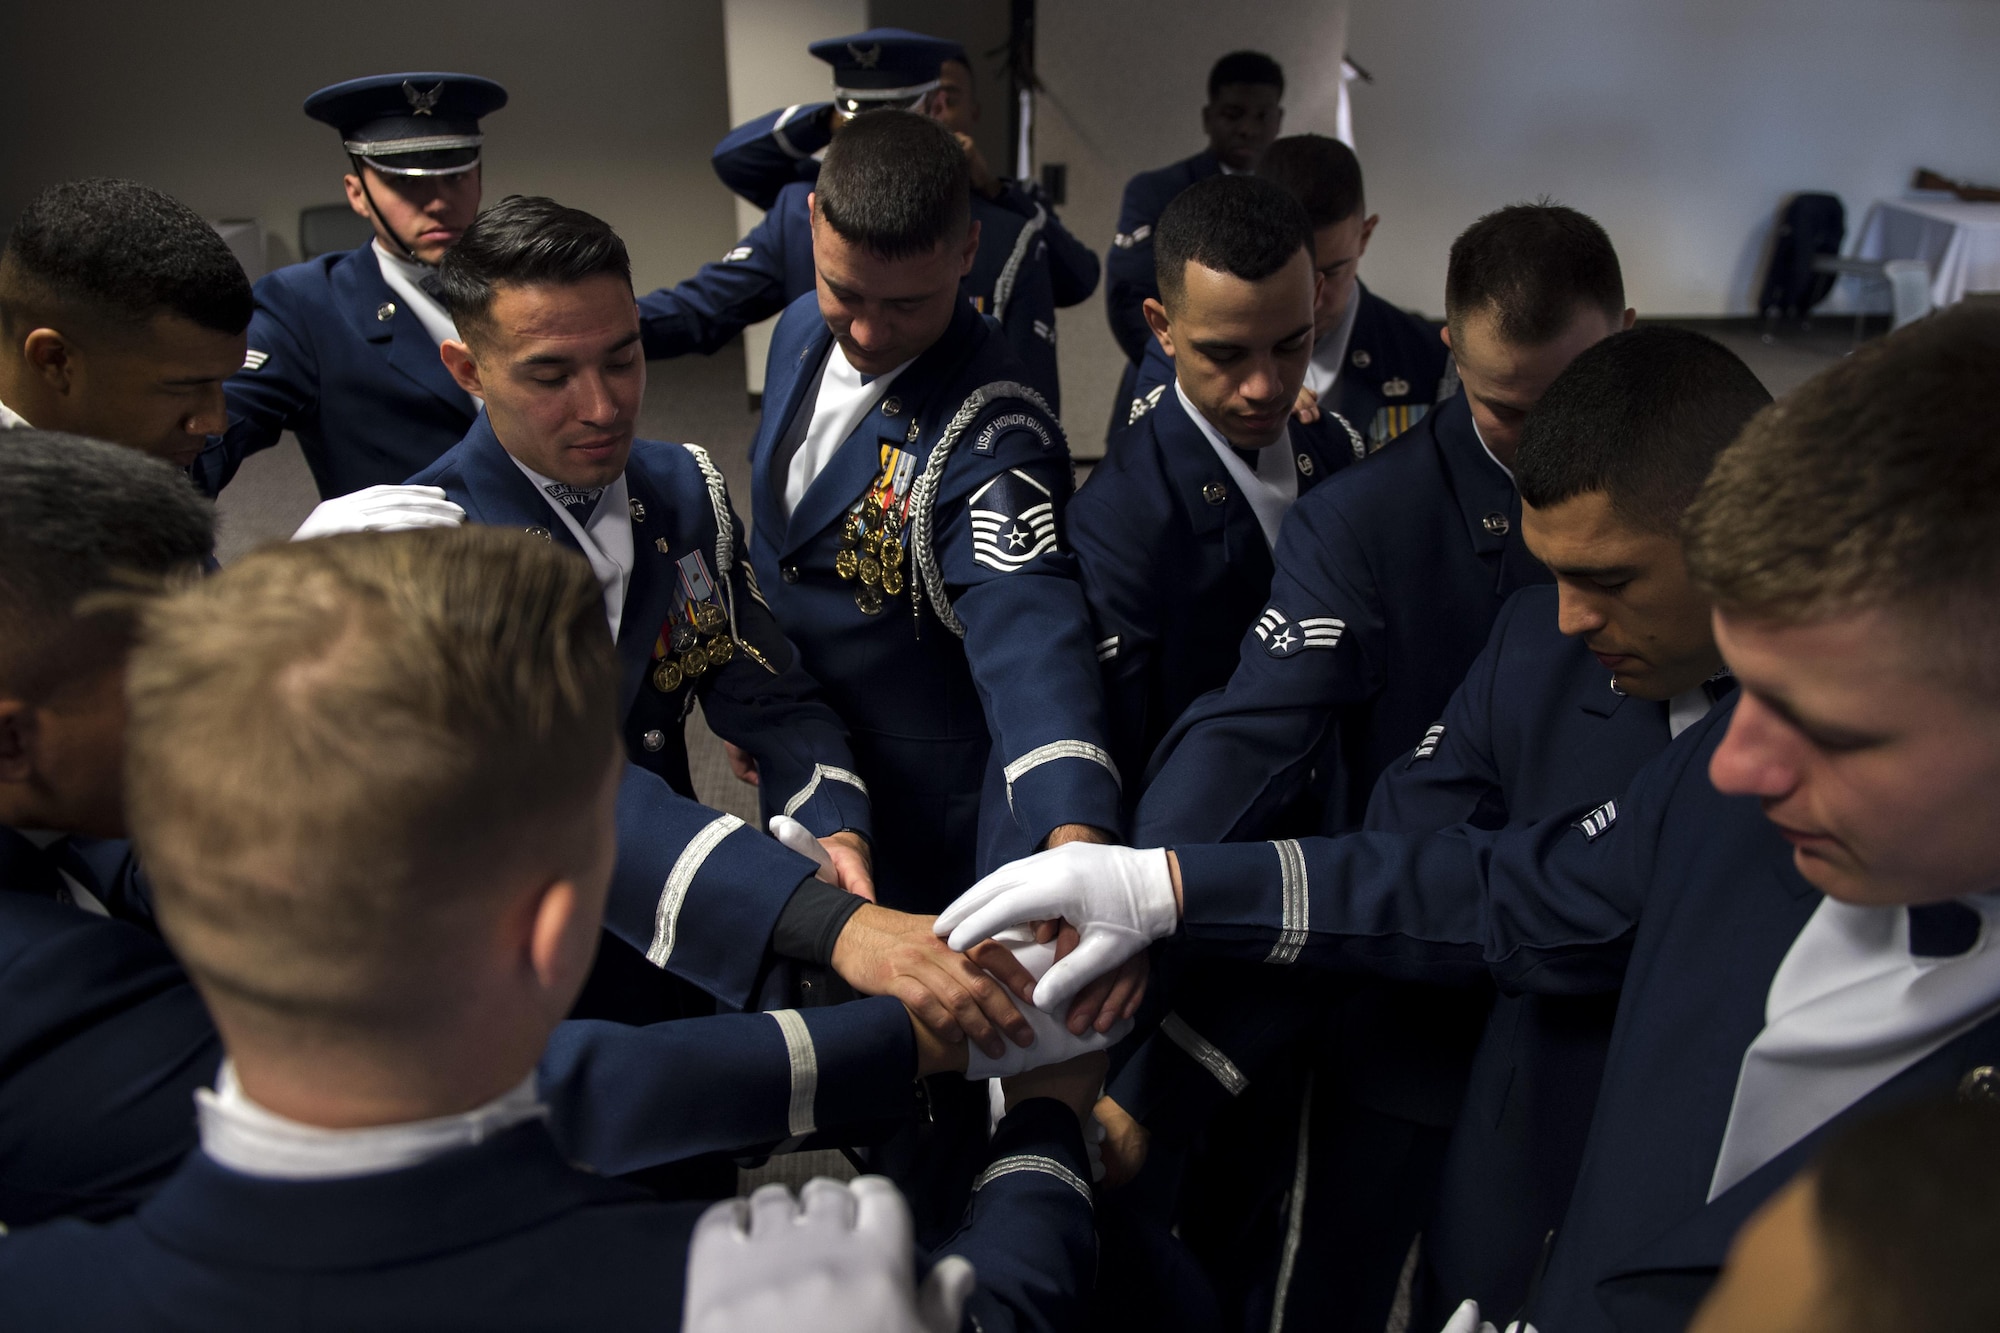 U.S. Air Force Honor Guard Drill Team members pray before a performance at the Live on Green event in Pasadena, Calif., Jan. 1, 2017.Drill team members come together and pray as part of their pre-drill ritual before every performance. (U.S. Air Force photo by Senior Airman Philip Bryant)